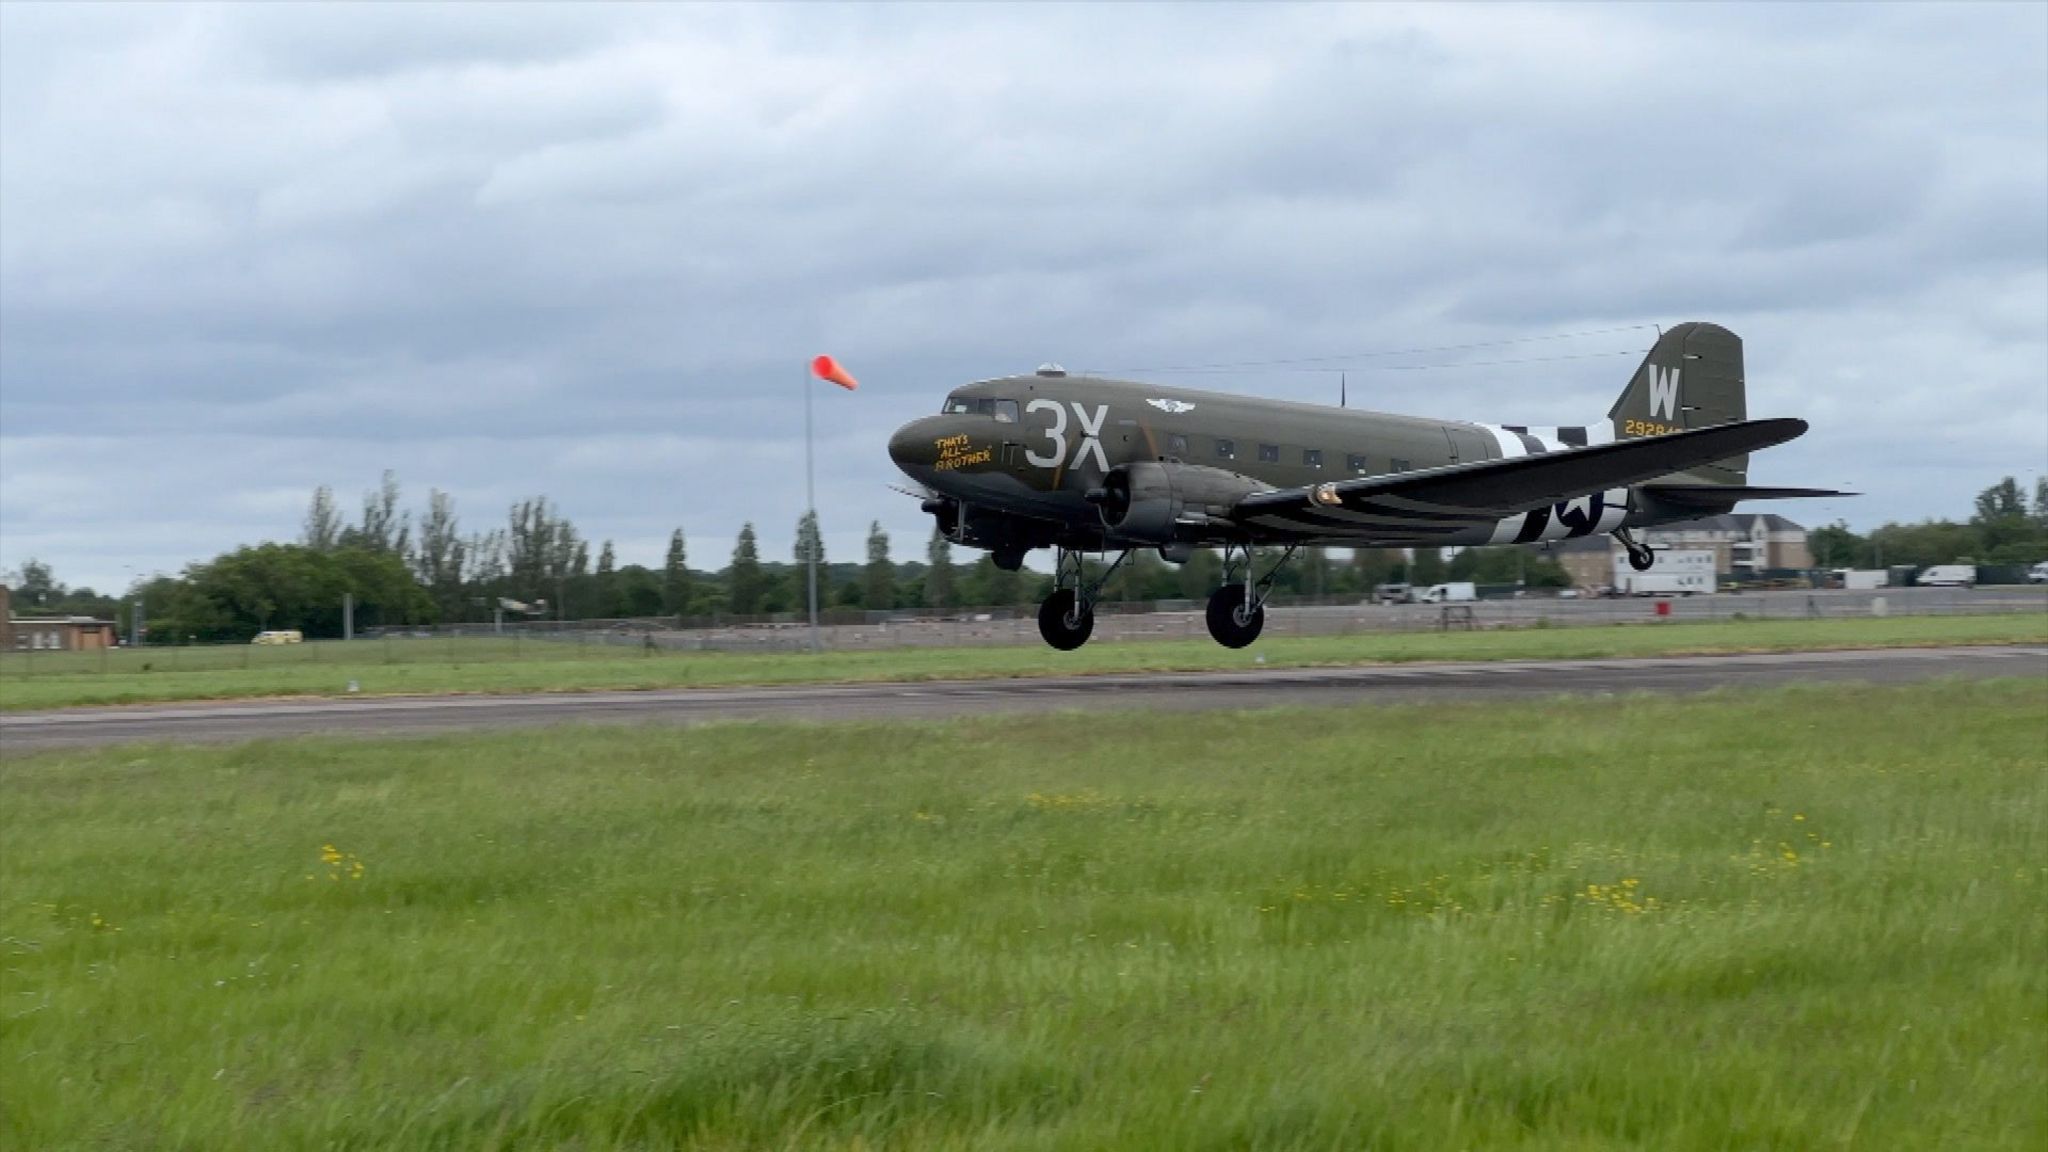 The plane that's all brother takes off during d-day commemorations